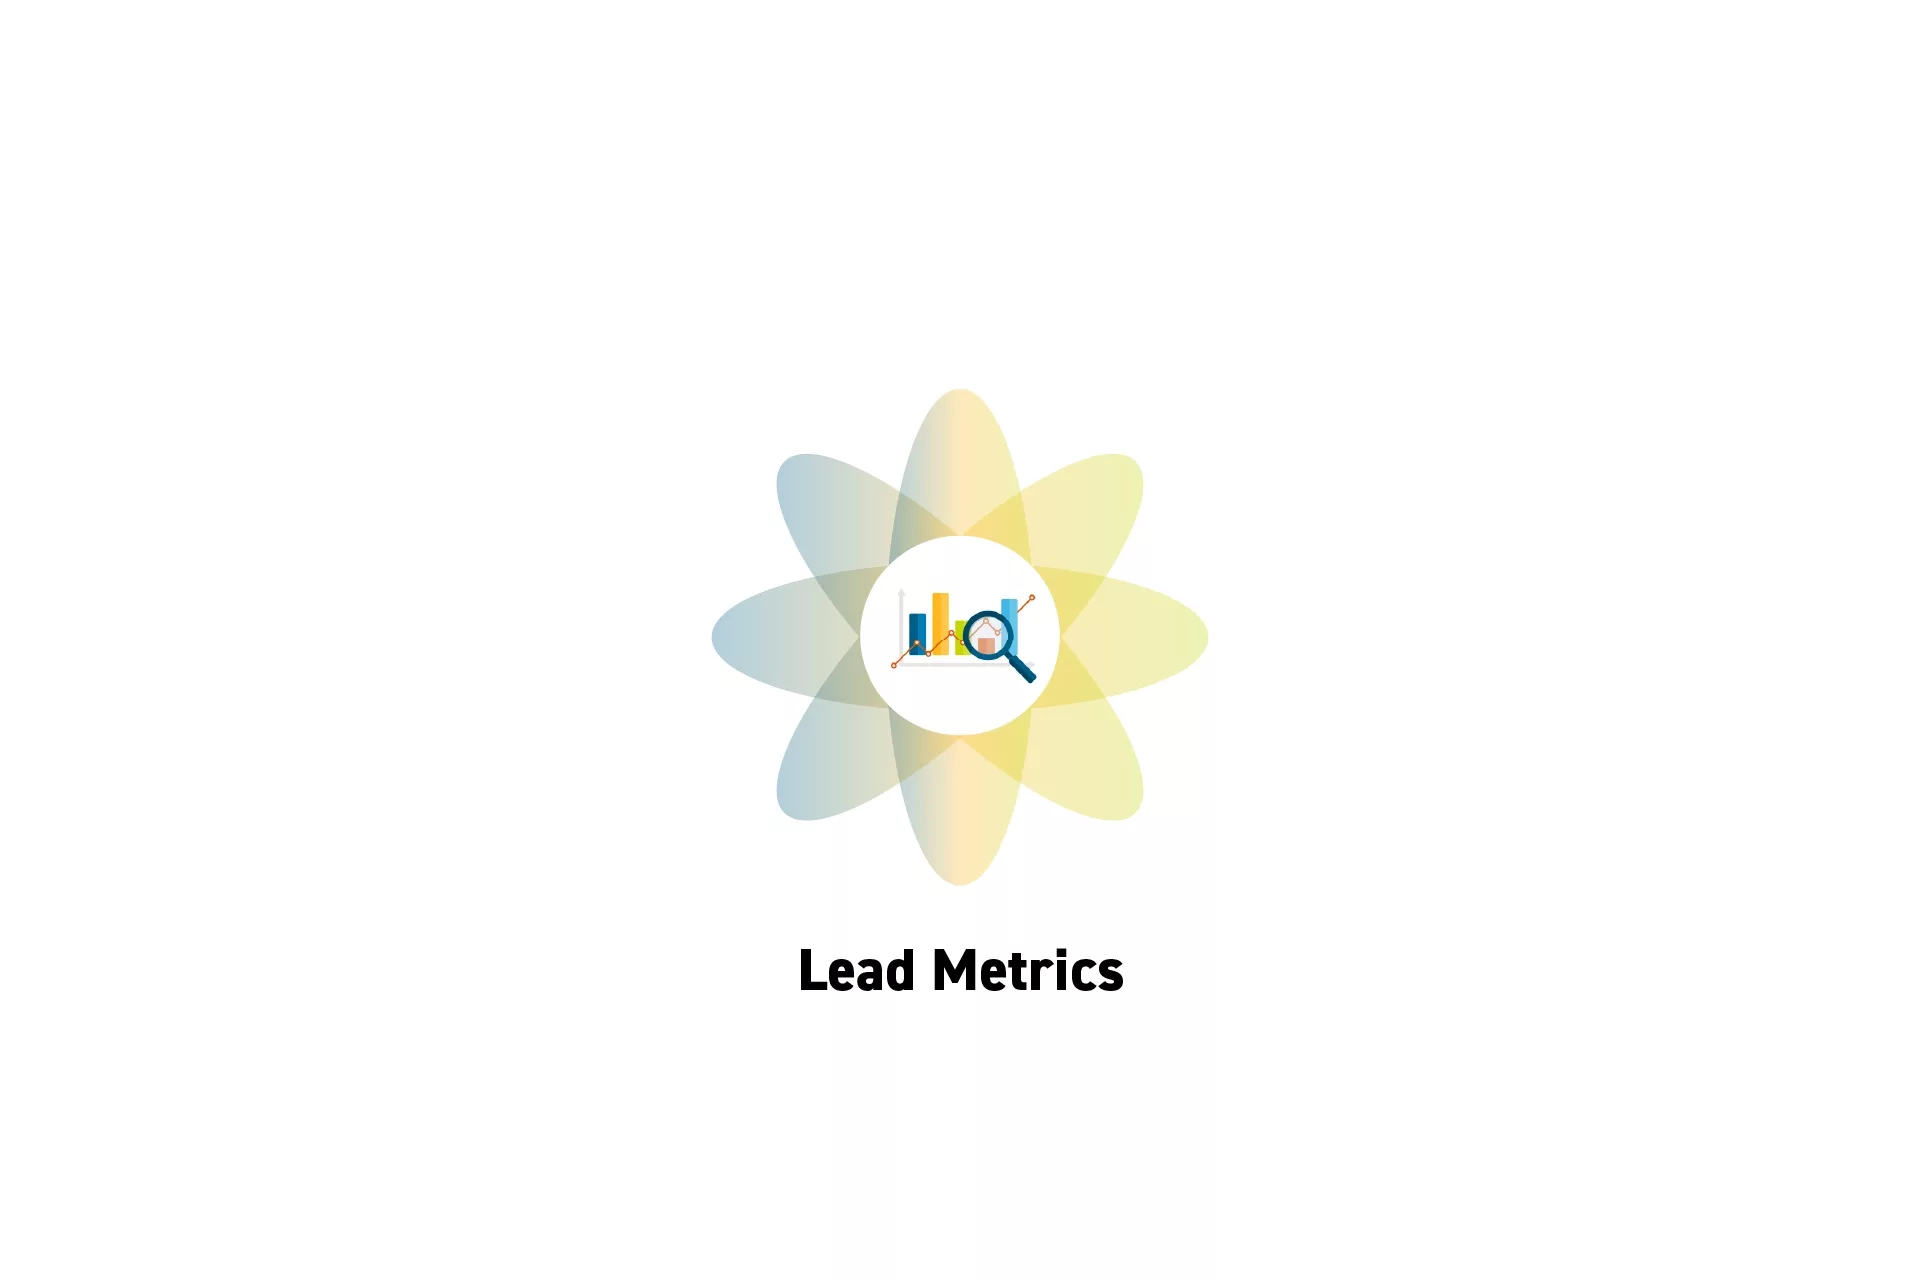 A flower that represents Analytics with the text "Lead Metrics" beneath it.